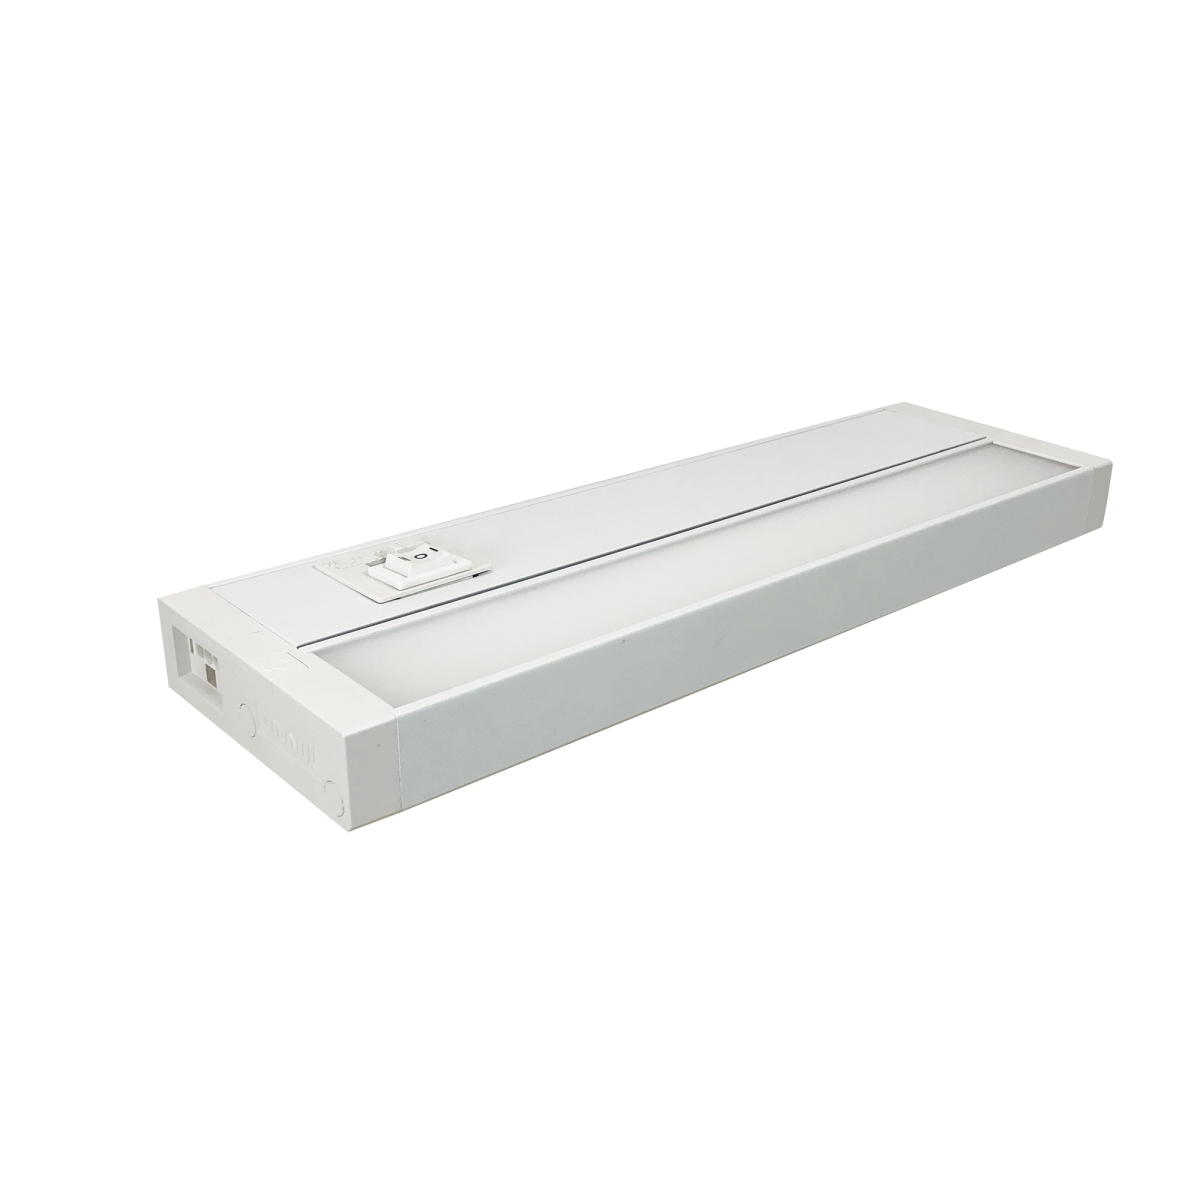 Picture of Nora Lighting NUDTW-8811-23345WH 11 in. Ledur Tunable White LED Undercabinet Light, White